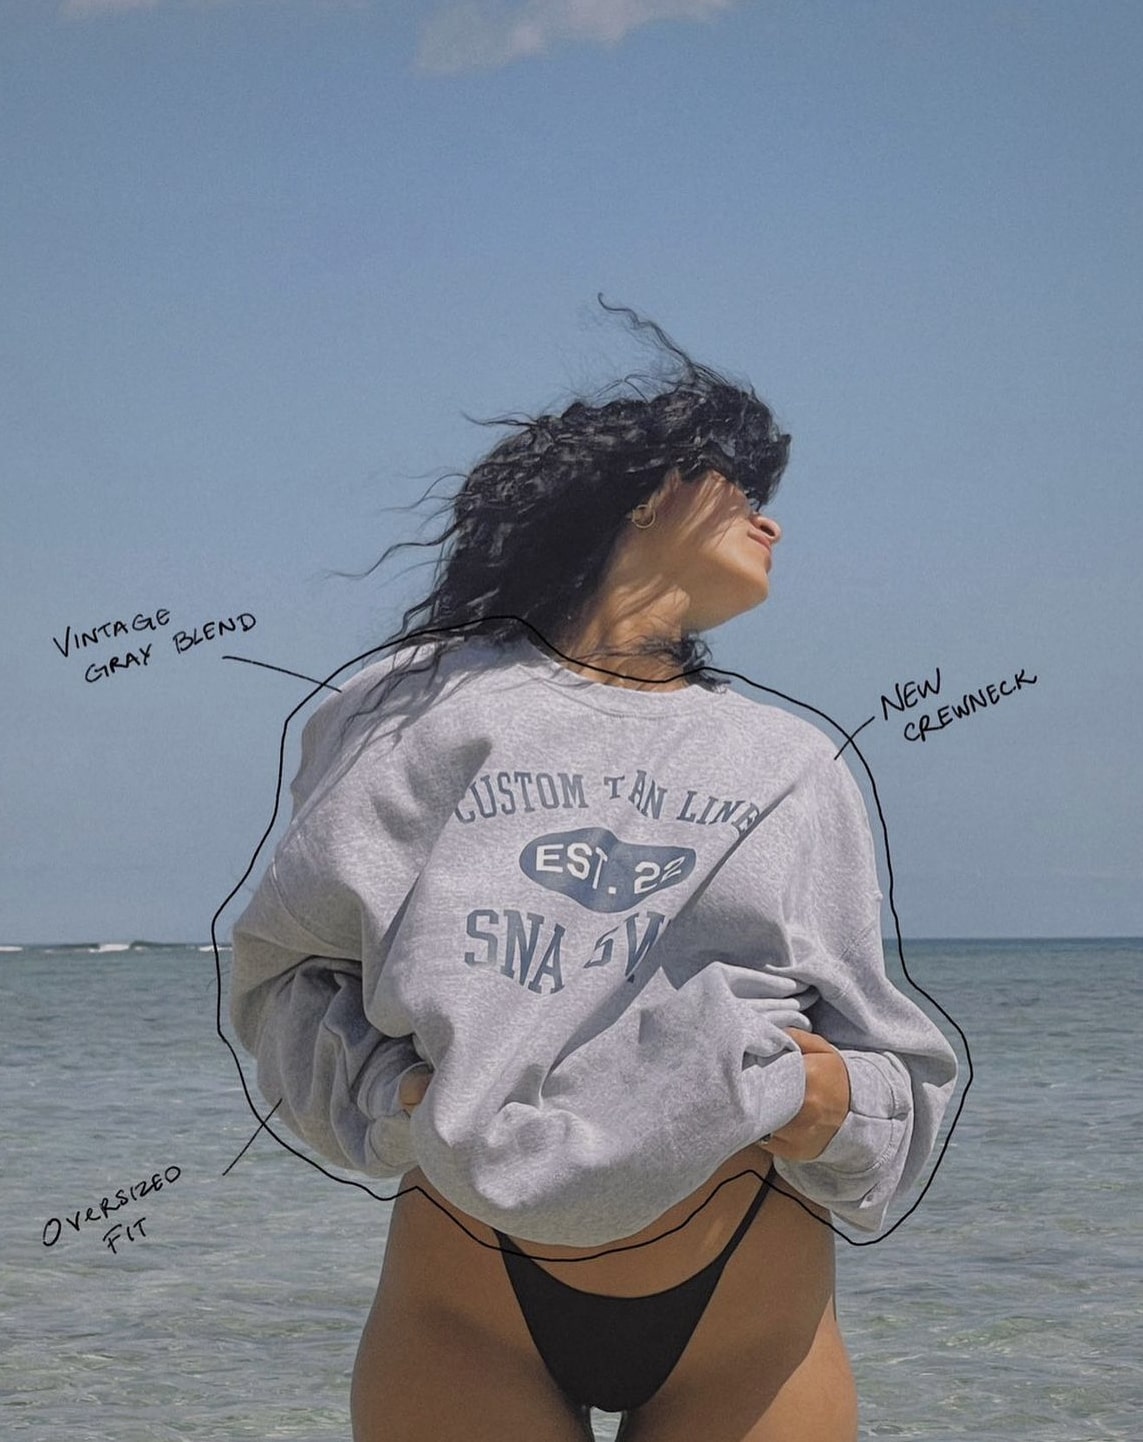 Girl posing in front of ocean wearing a sweatshirt that reads top to bottom left to right, "Custom Tan Lines, Est. 22, SNA SWM"